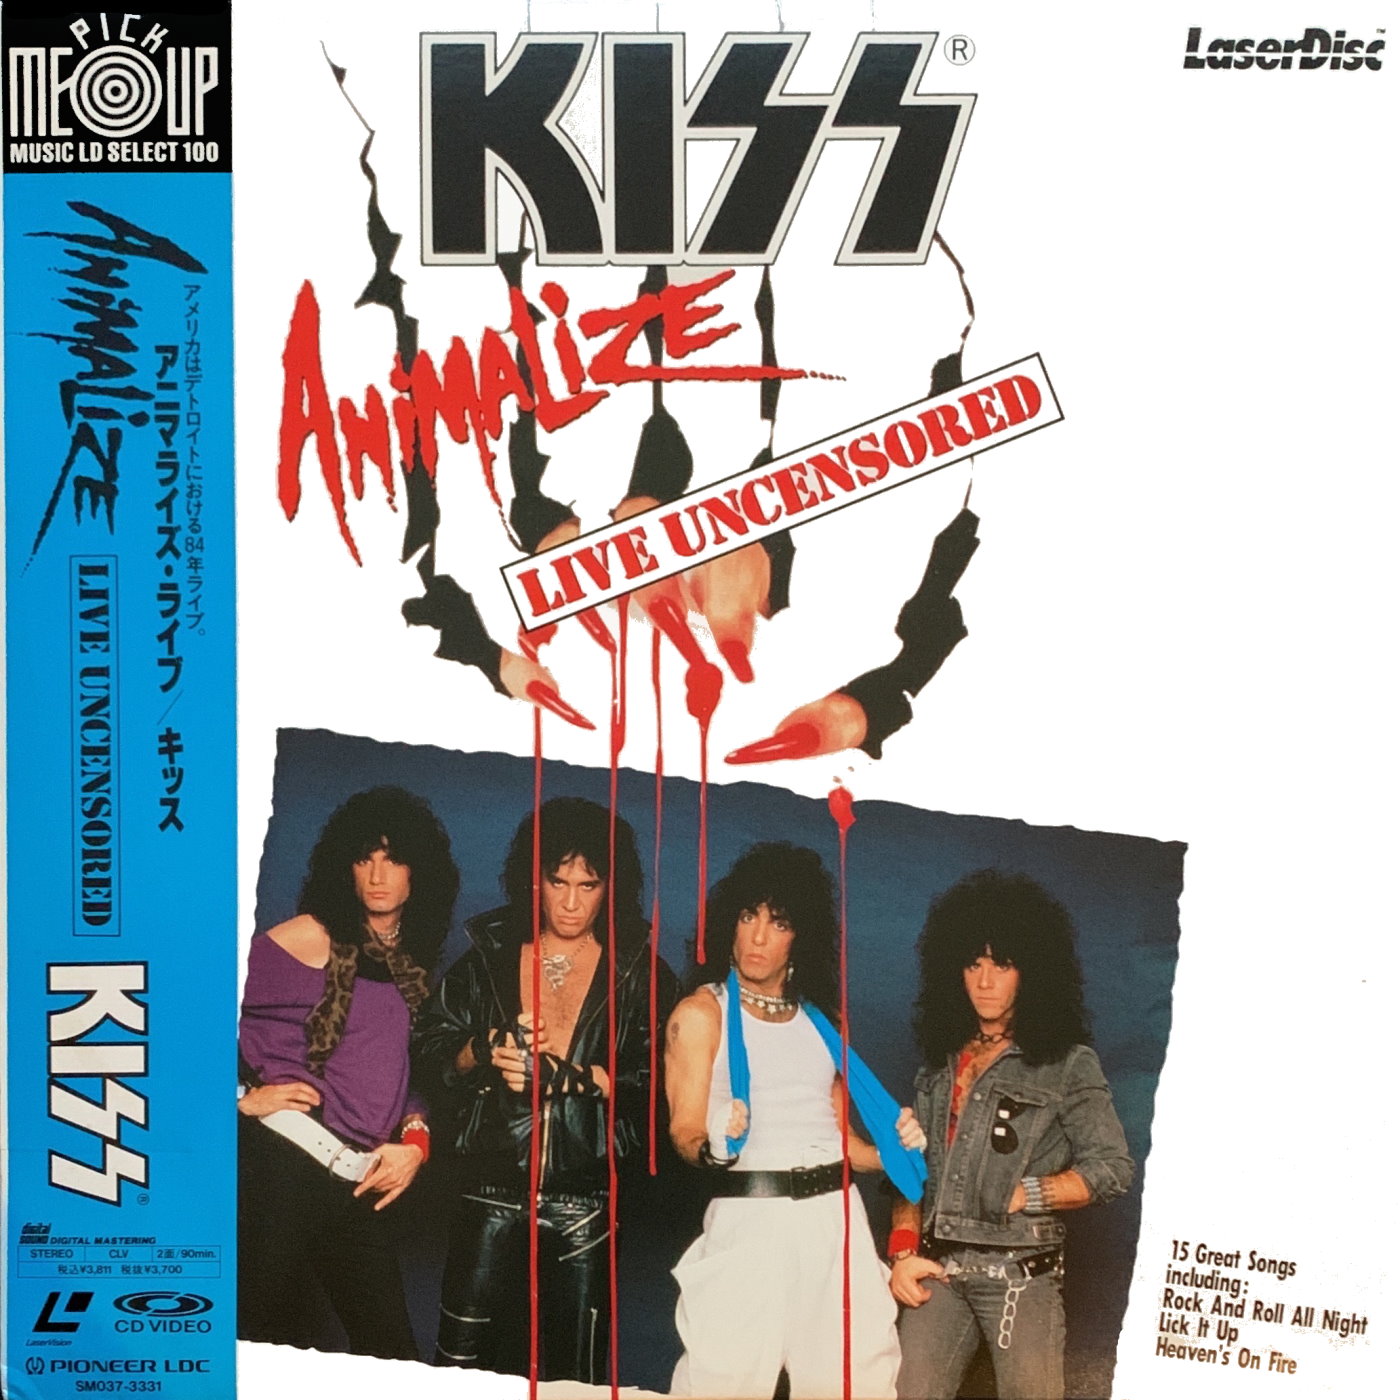 Cover - Kiss - Animalize Live Uncensored.jpg